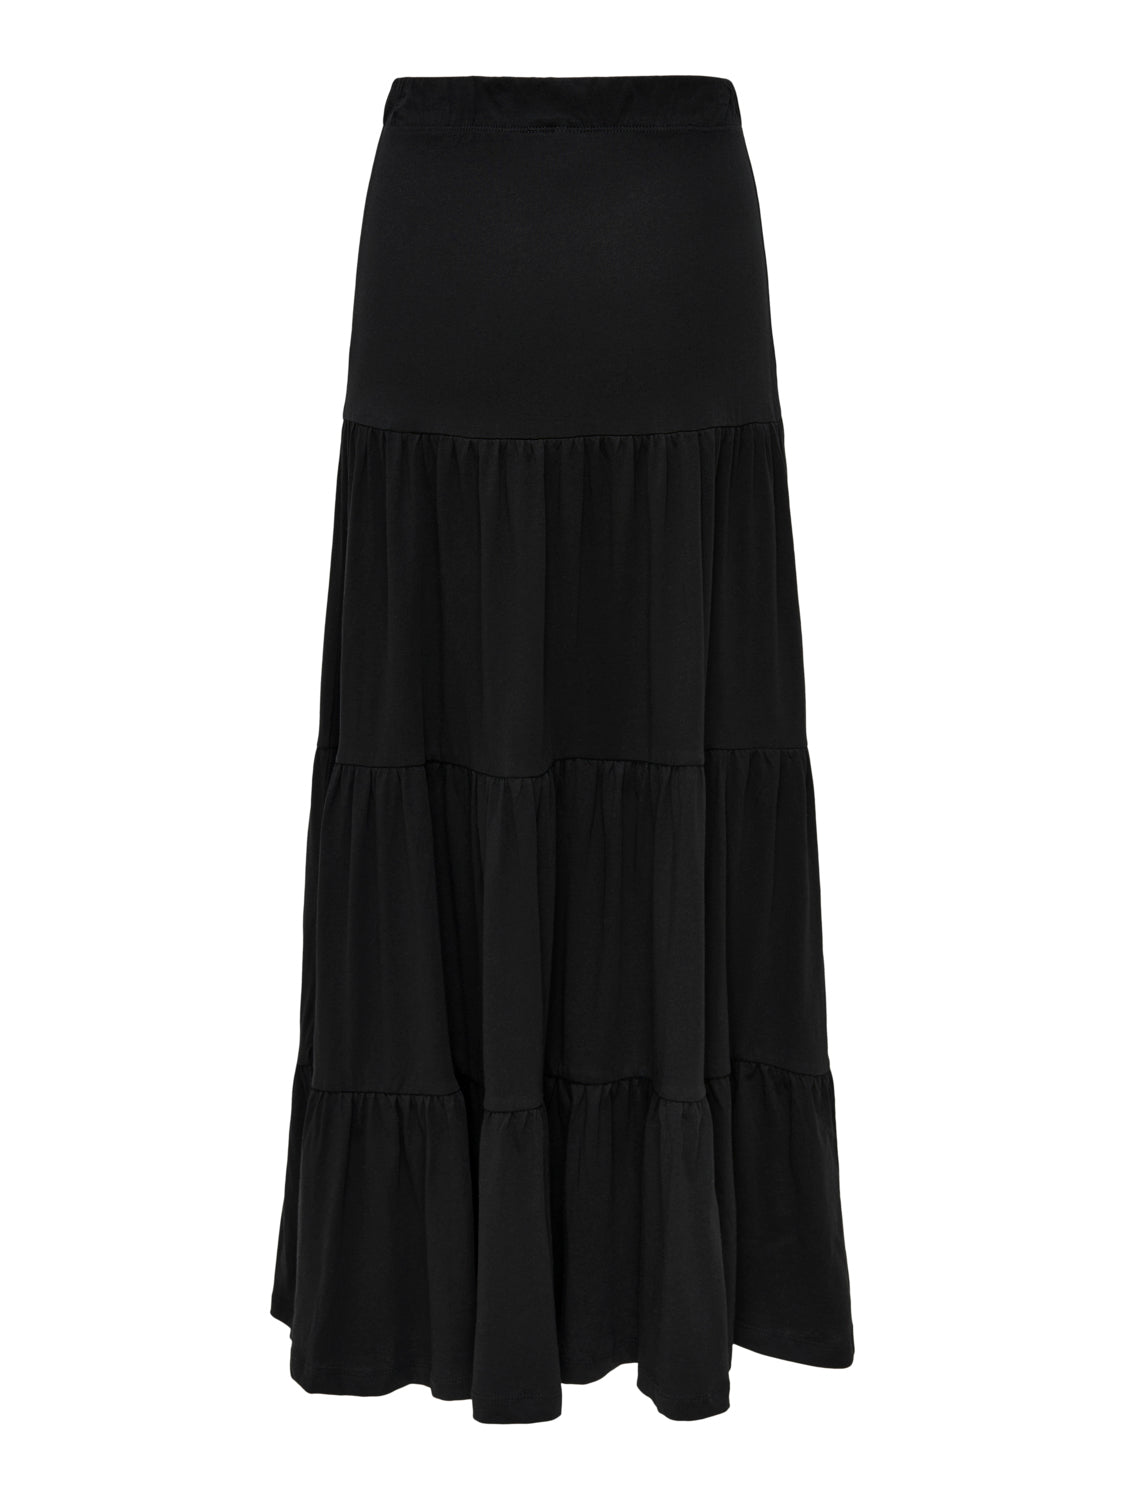 May Maxi Skirt- Only